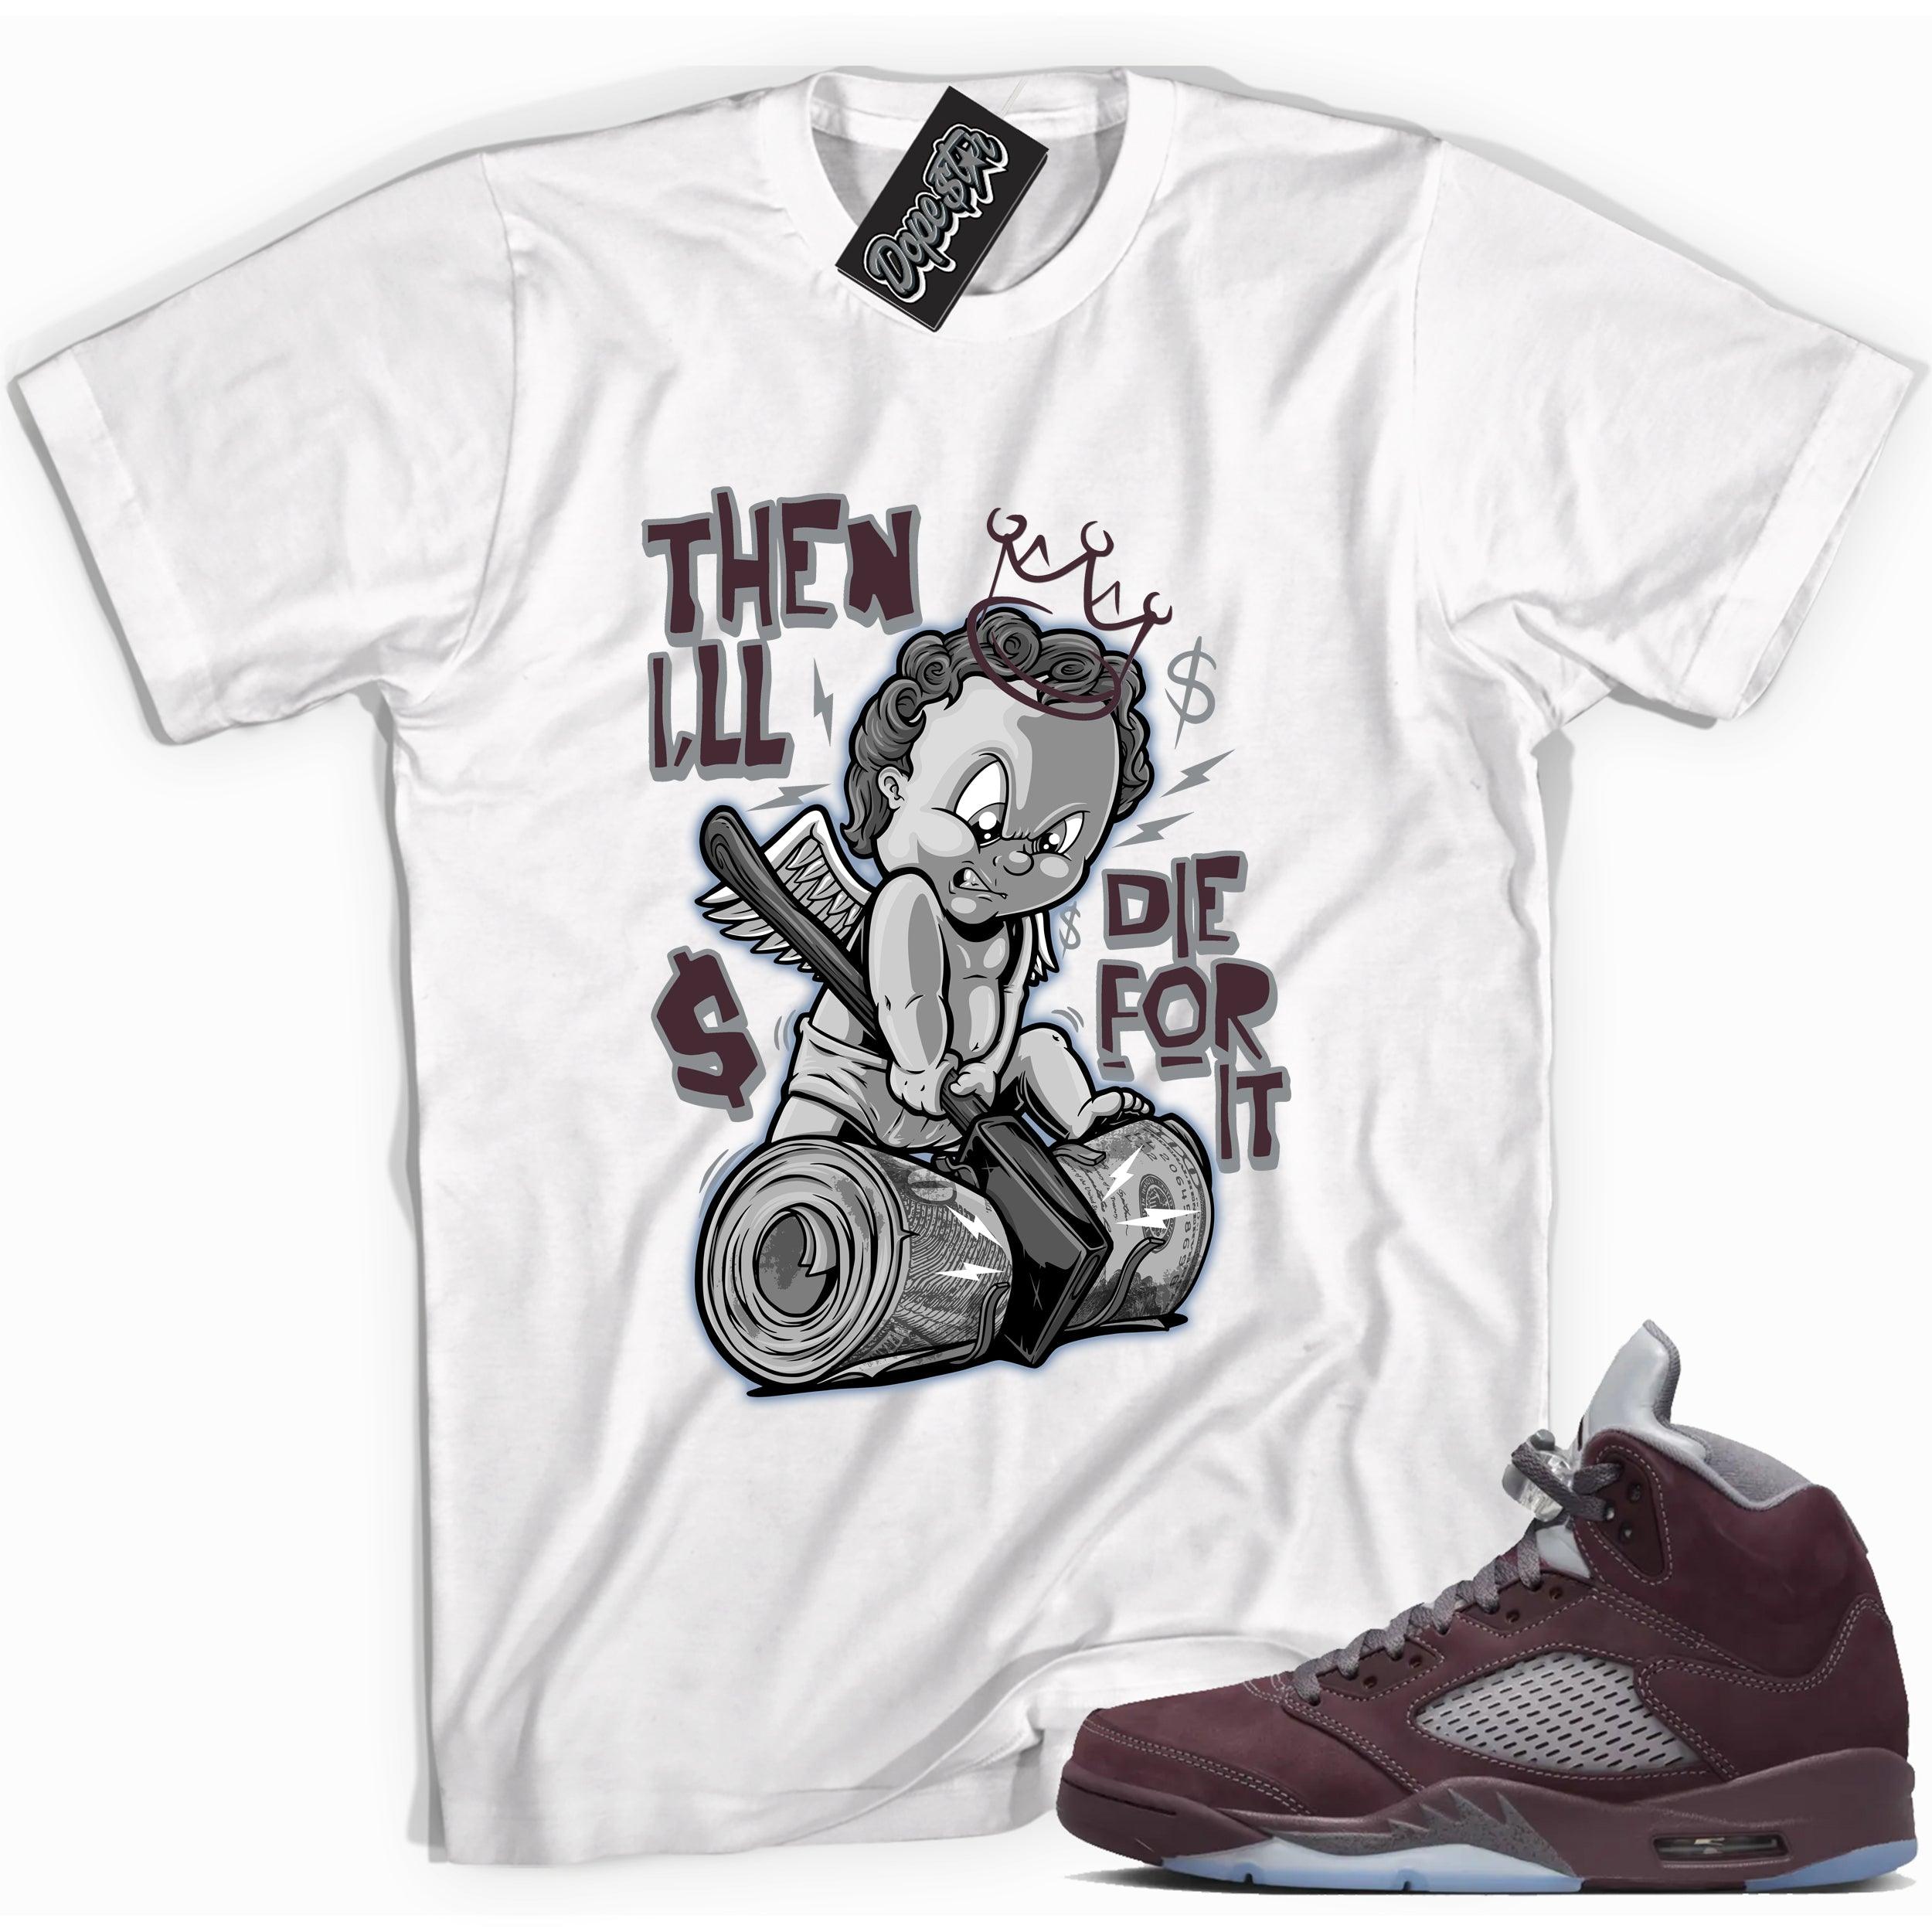 Cool White graphic tee with “ Then I’ll 2 ” print, that perfectly matches Air Jordan 5 Burgundy 2023 sneakers